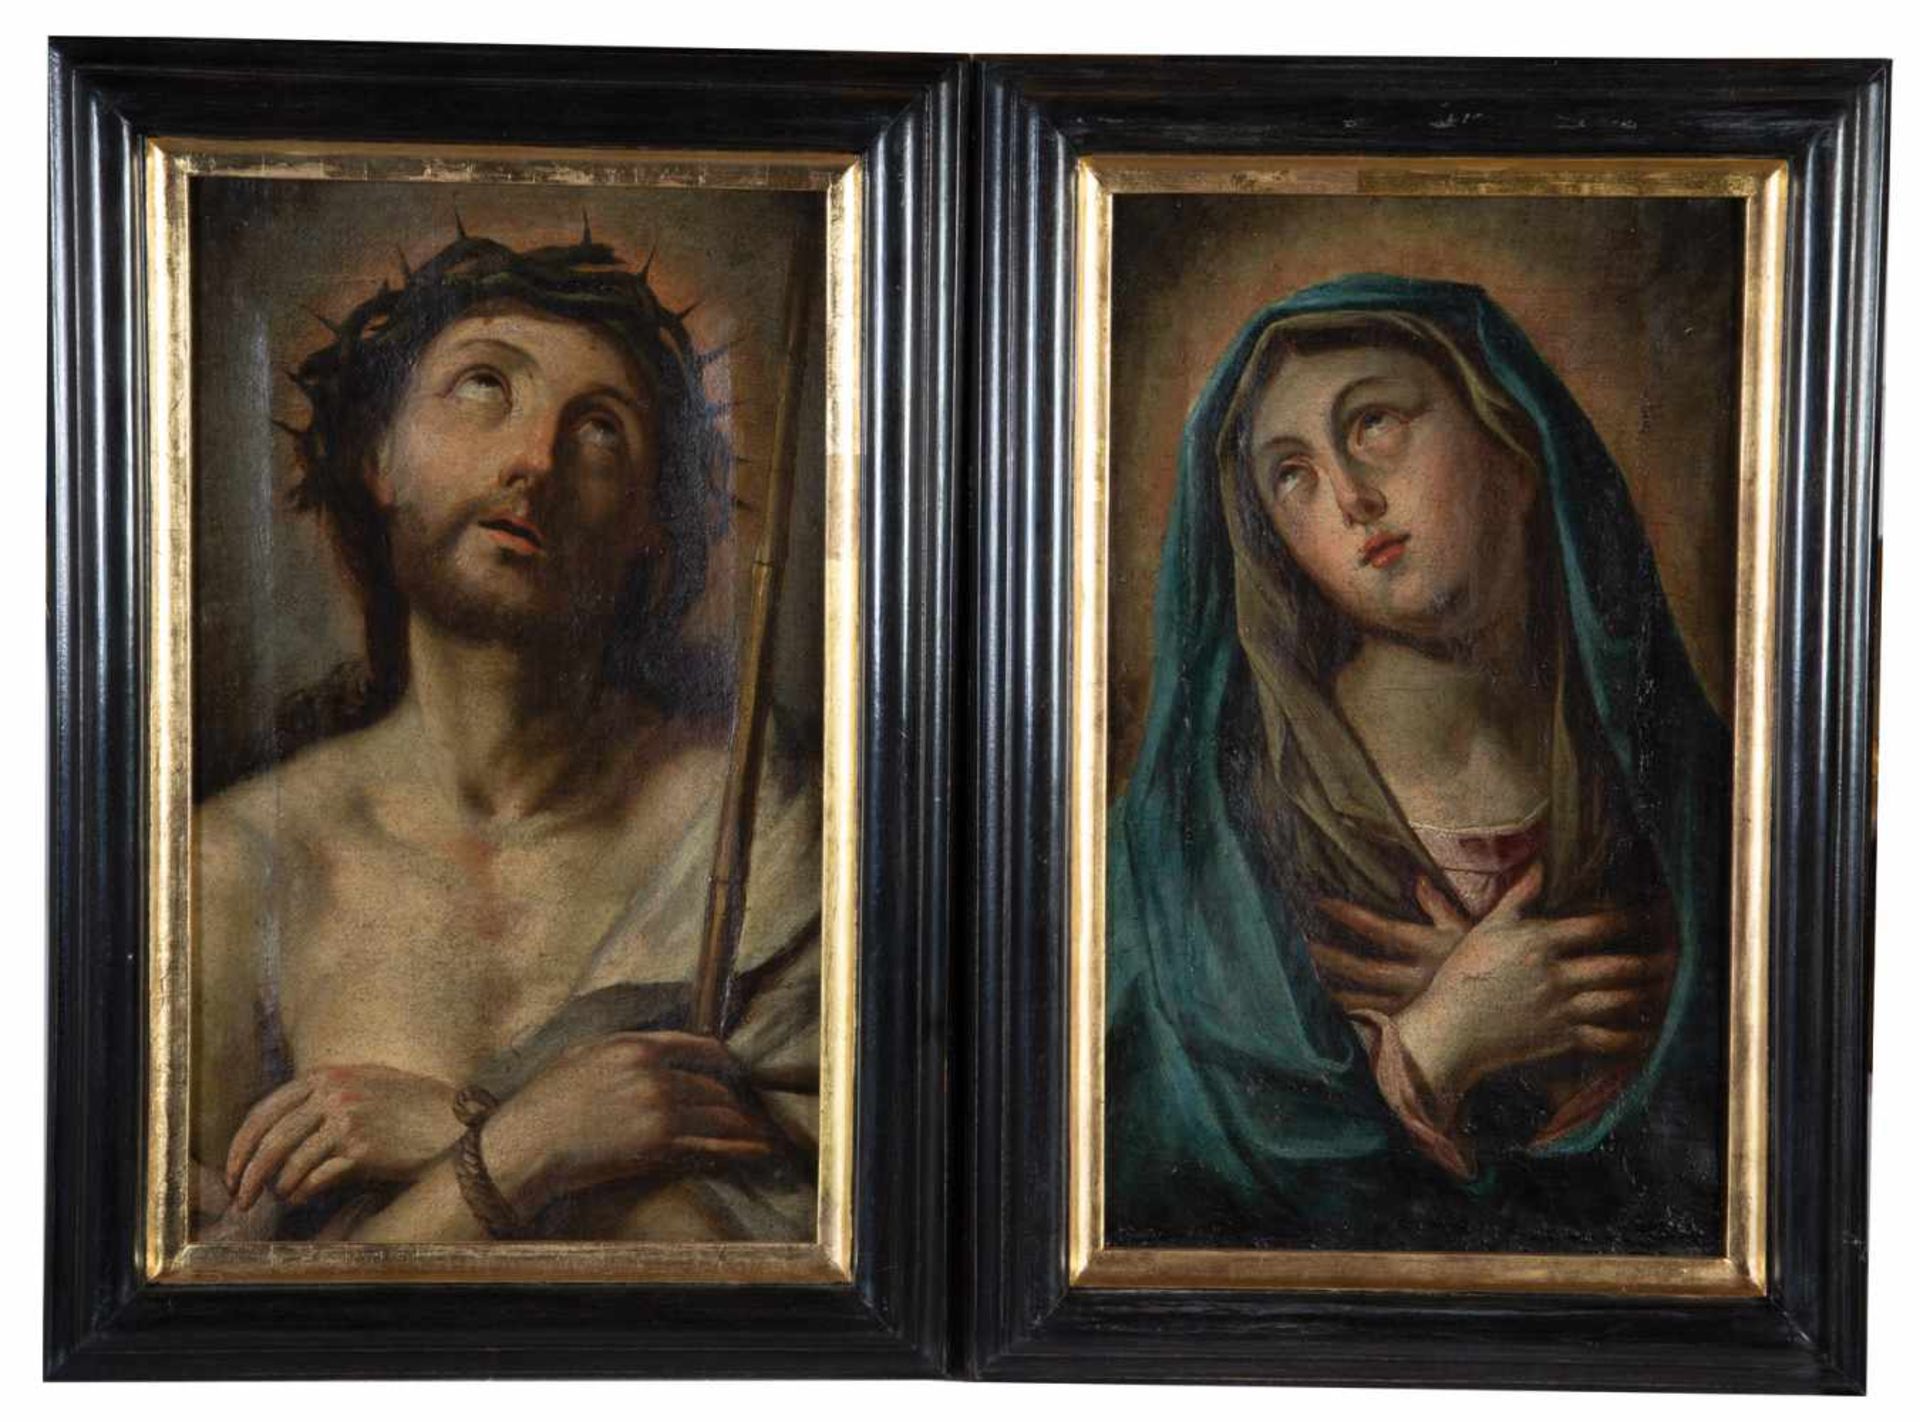 Ecce Homo and Virgin Mary after Guido Reni, southern German, 18th century. Oil on canvas,partially